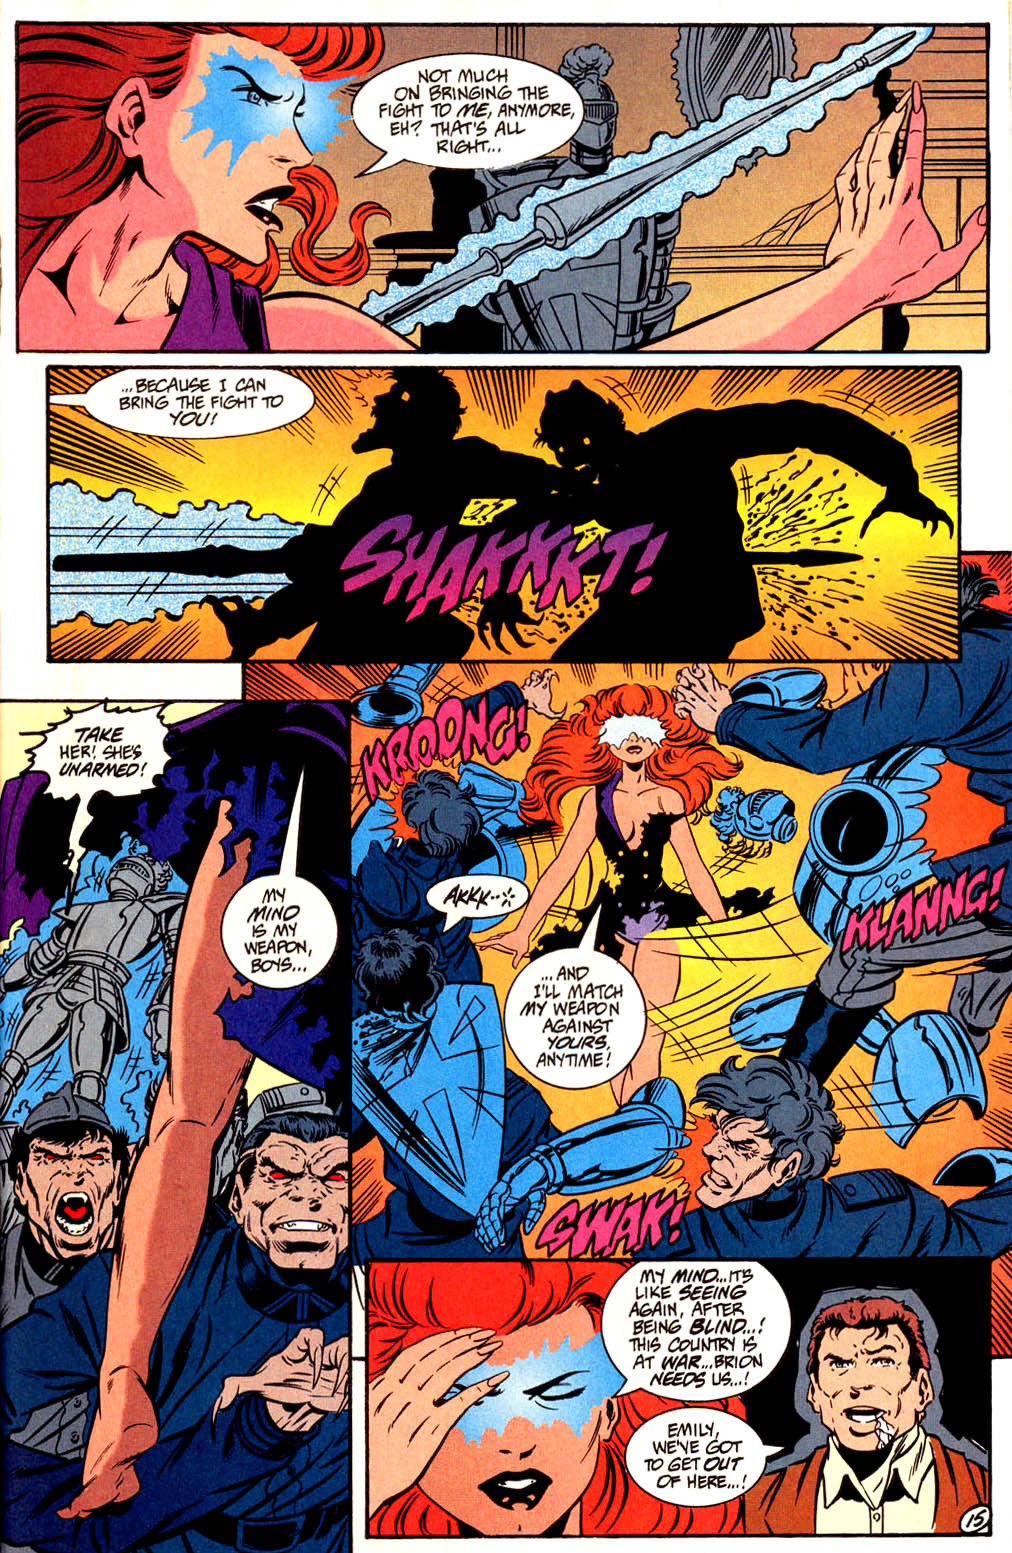 Outsiders (1993) 1_-_Omega Page 14